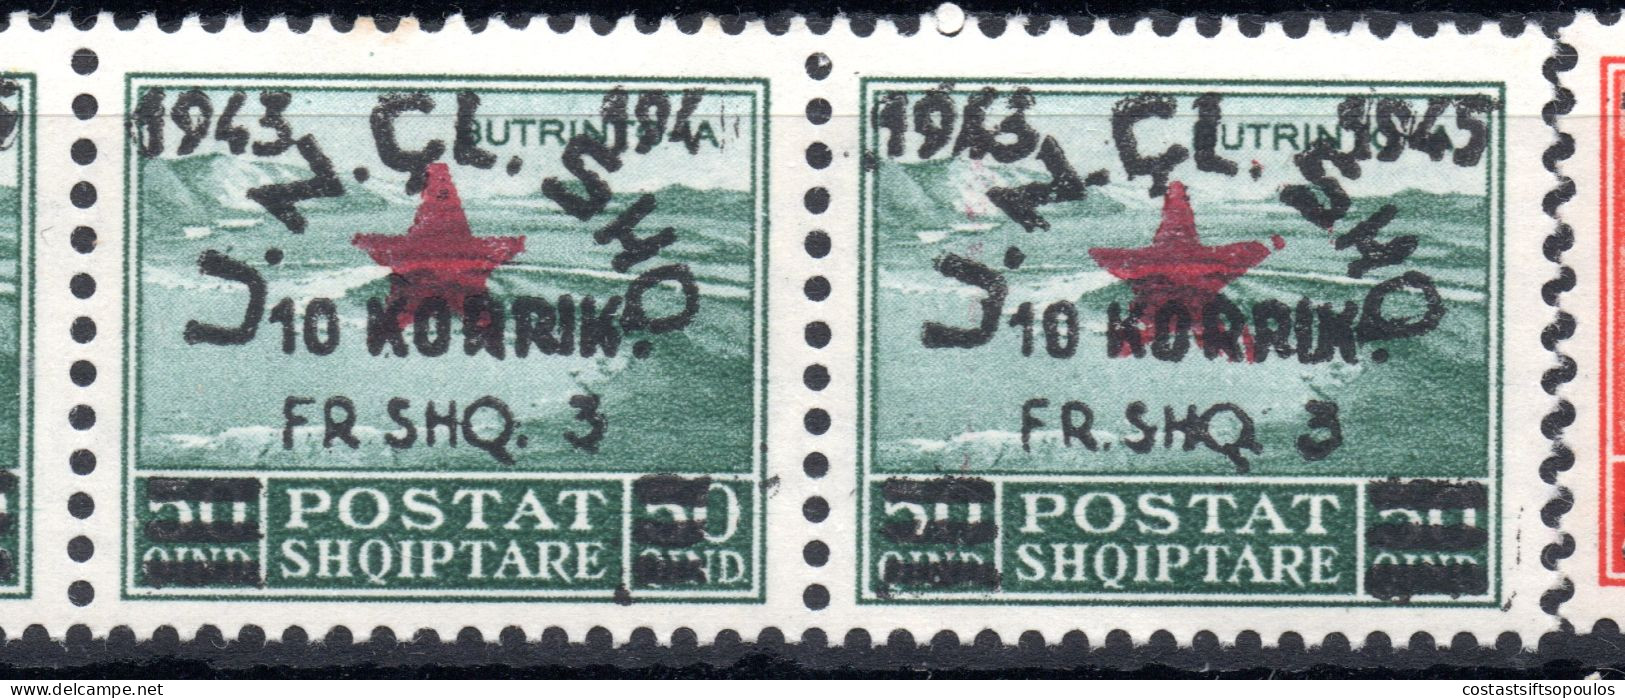 2936. ALBANIA 1945 ALBANIAN ARMY, MICH.368-374 MNH STRIPS OF 4. 1 X 373 194 INSTEAD OF 1945,SC. 354-360 - Albania